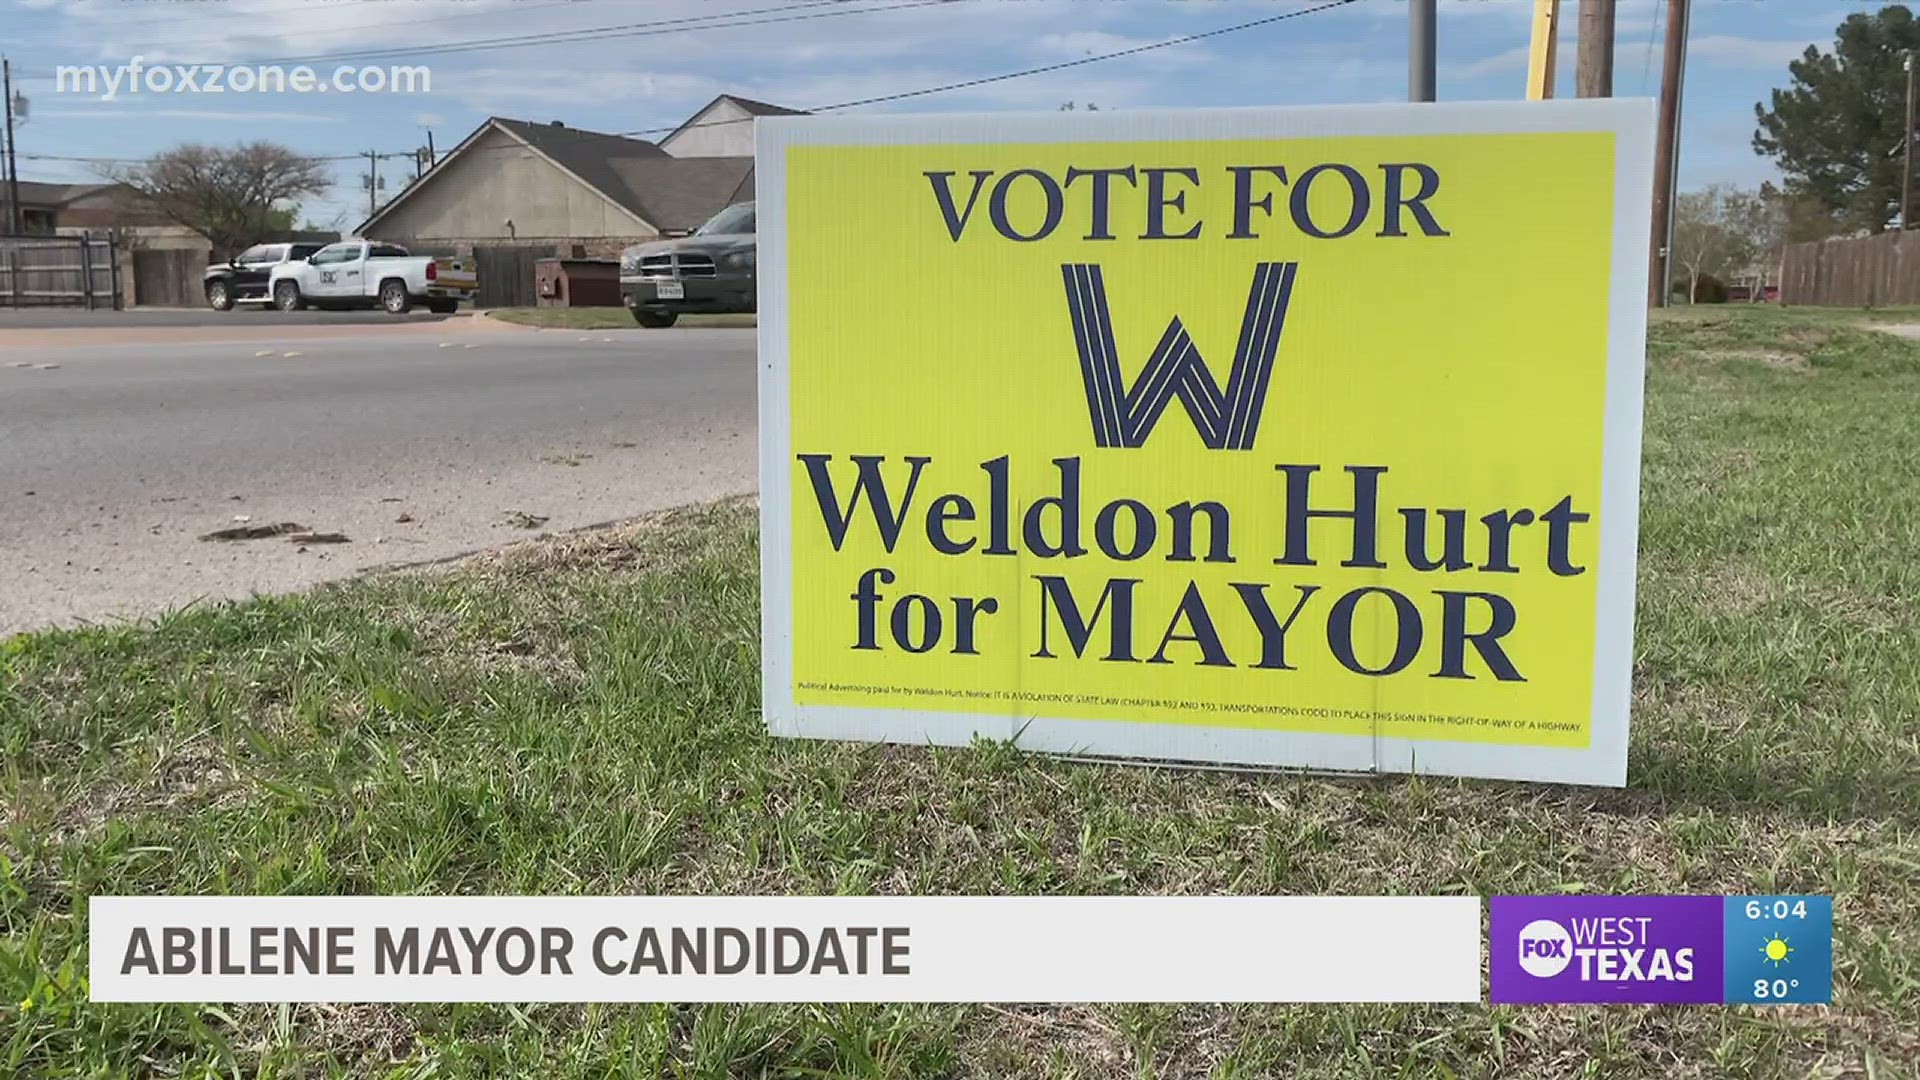 The seat for Abilene mayor is up for grabs, four candidates are looking to fill the seat. We will be sharing interviews with each one leading into May 6th elections.